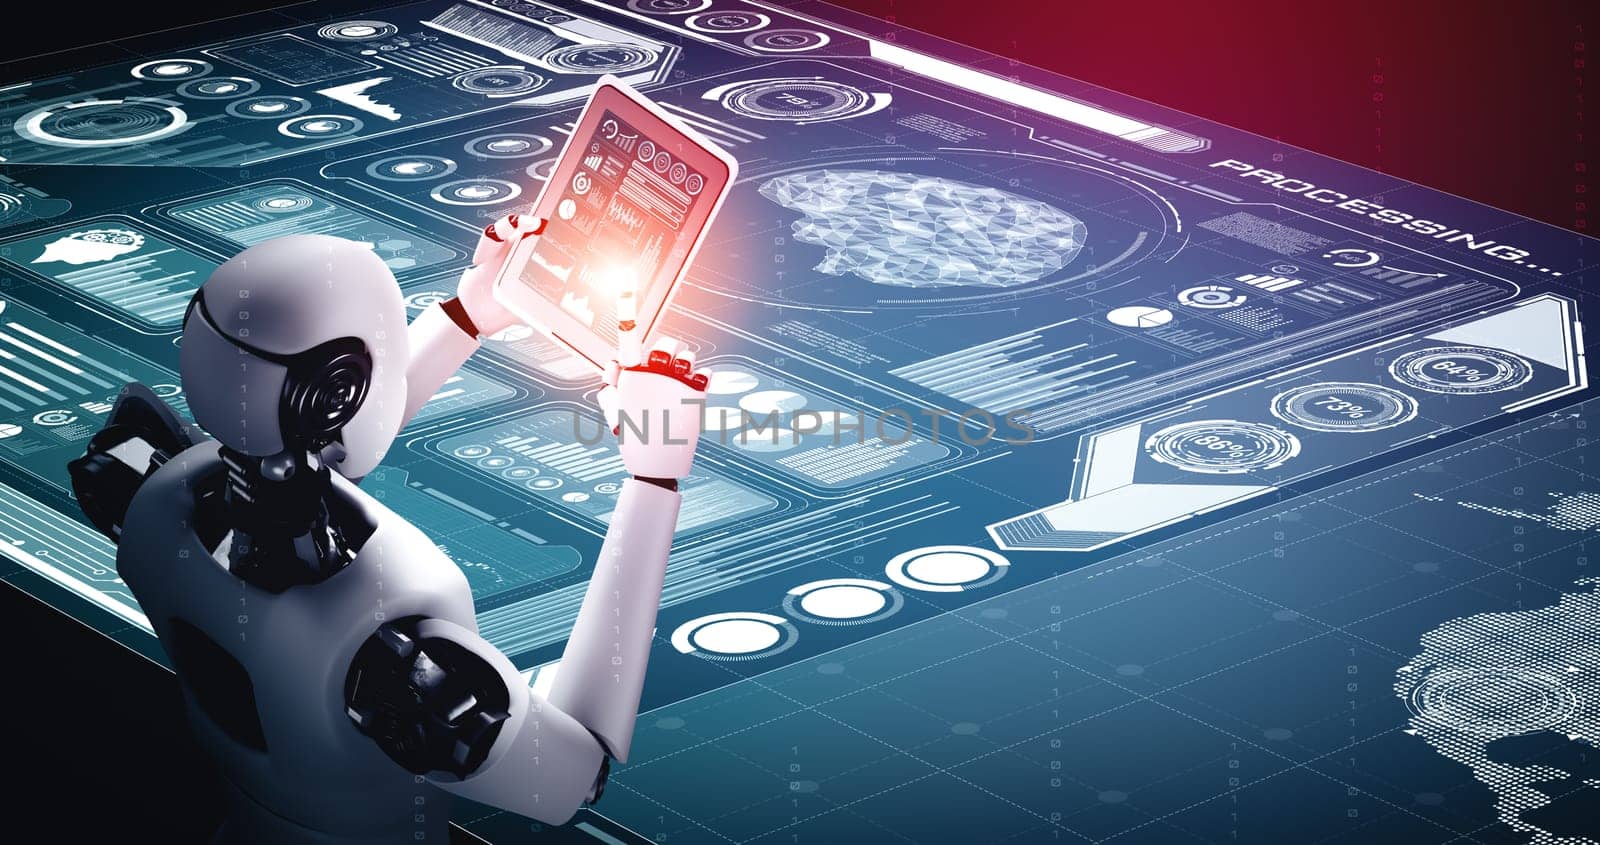 XAI 3d illustration Robot humanoid using tablet computer for big data analytic using AI thinking brain , artificial intelligence and machine learning process for the 4th fourth industrial revolution. 3D rendering.